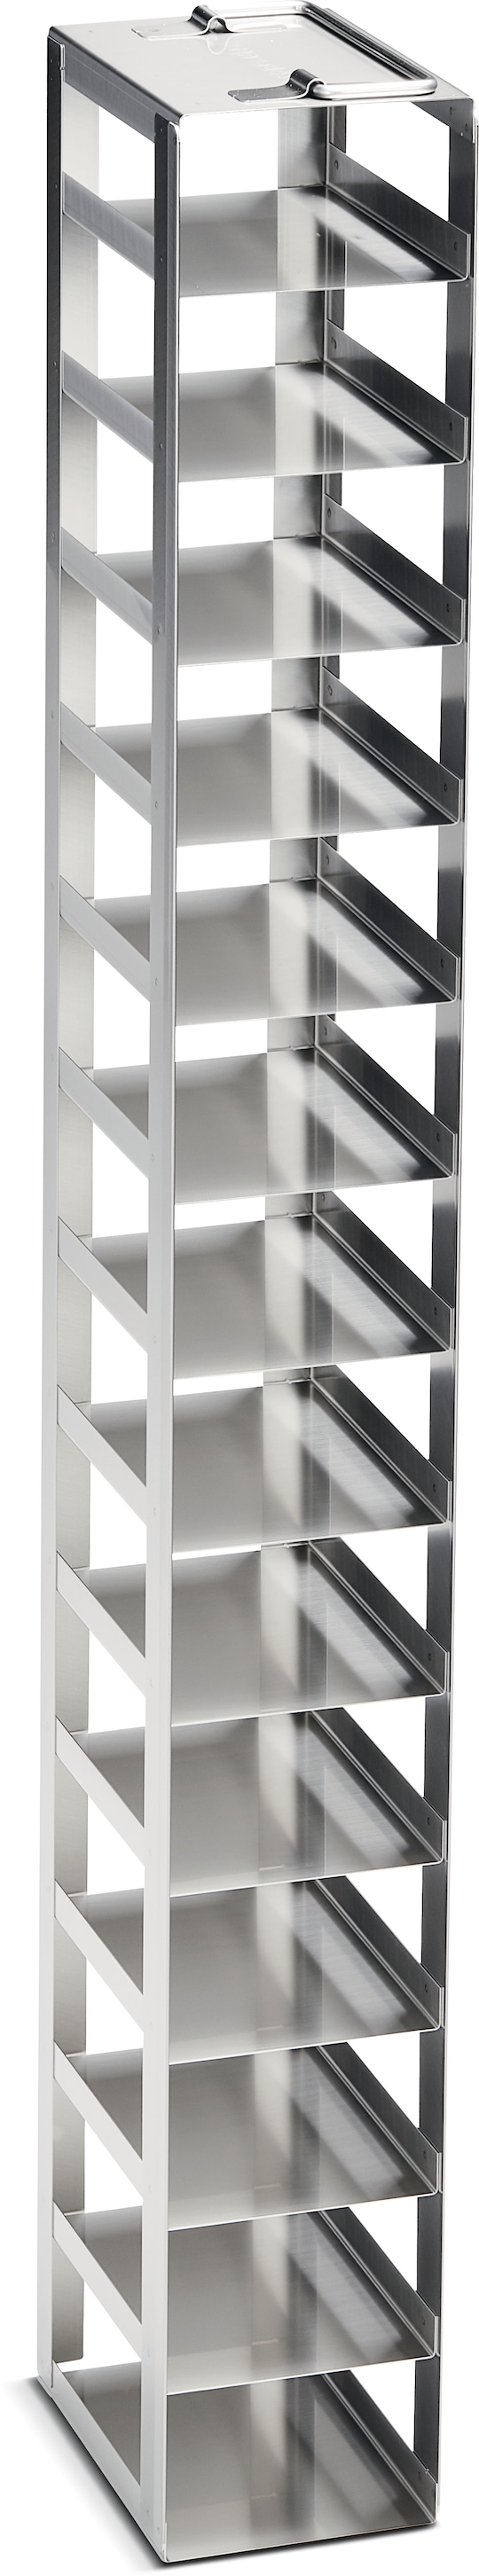 Metal tower rack for DWP in Eppendorf CryoCube_REG_ ULT chest freezer - (6001040110)